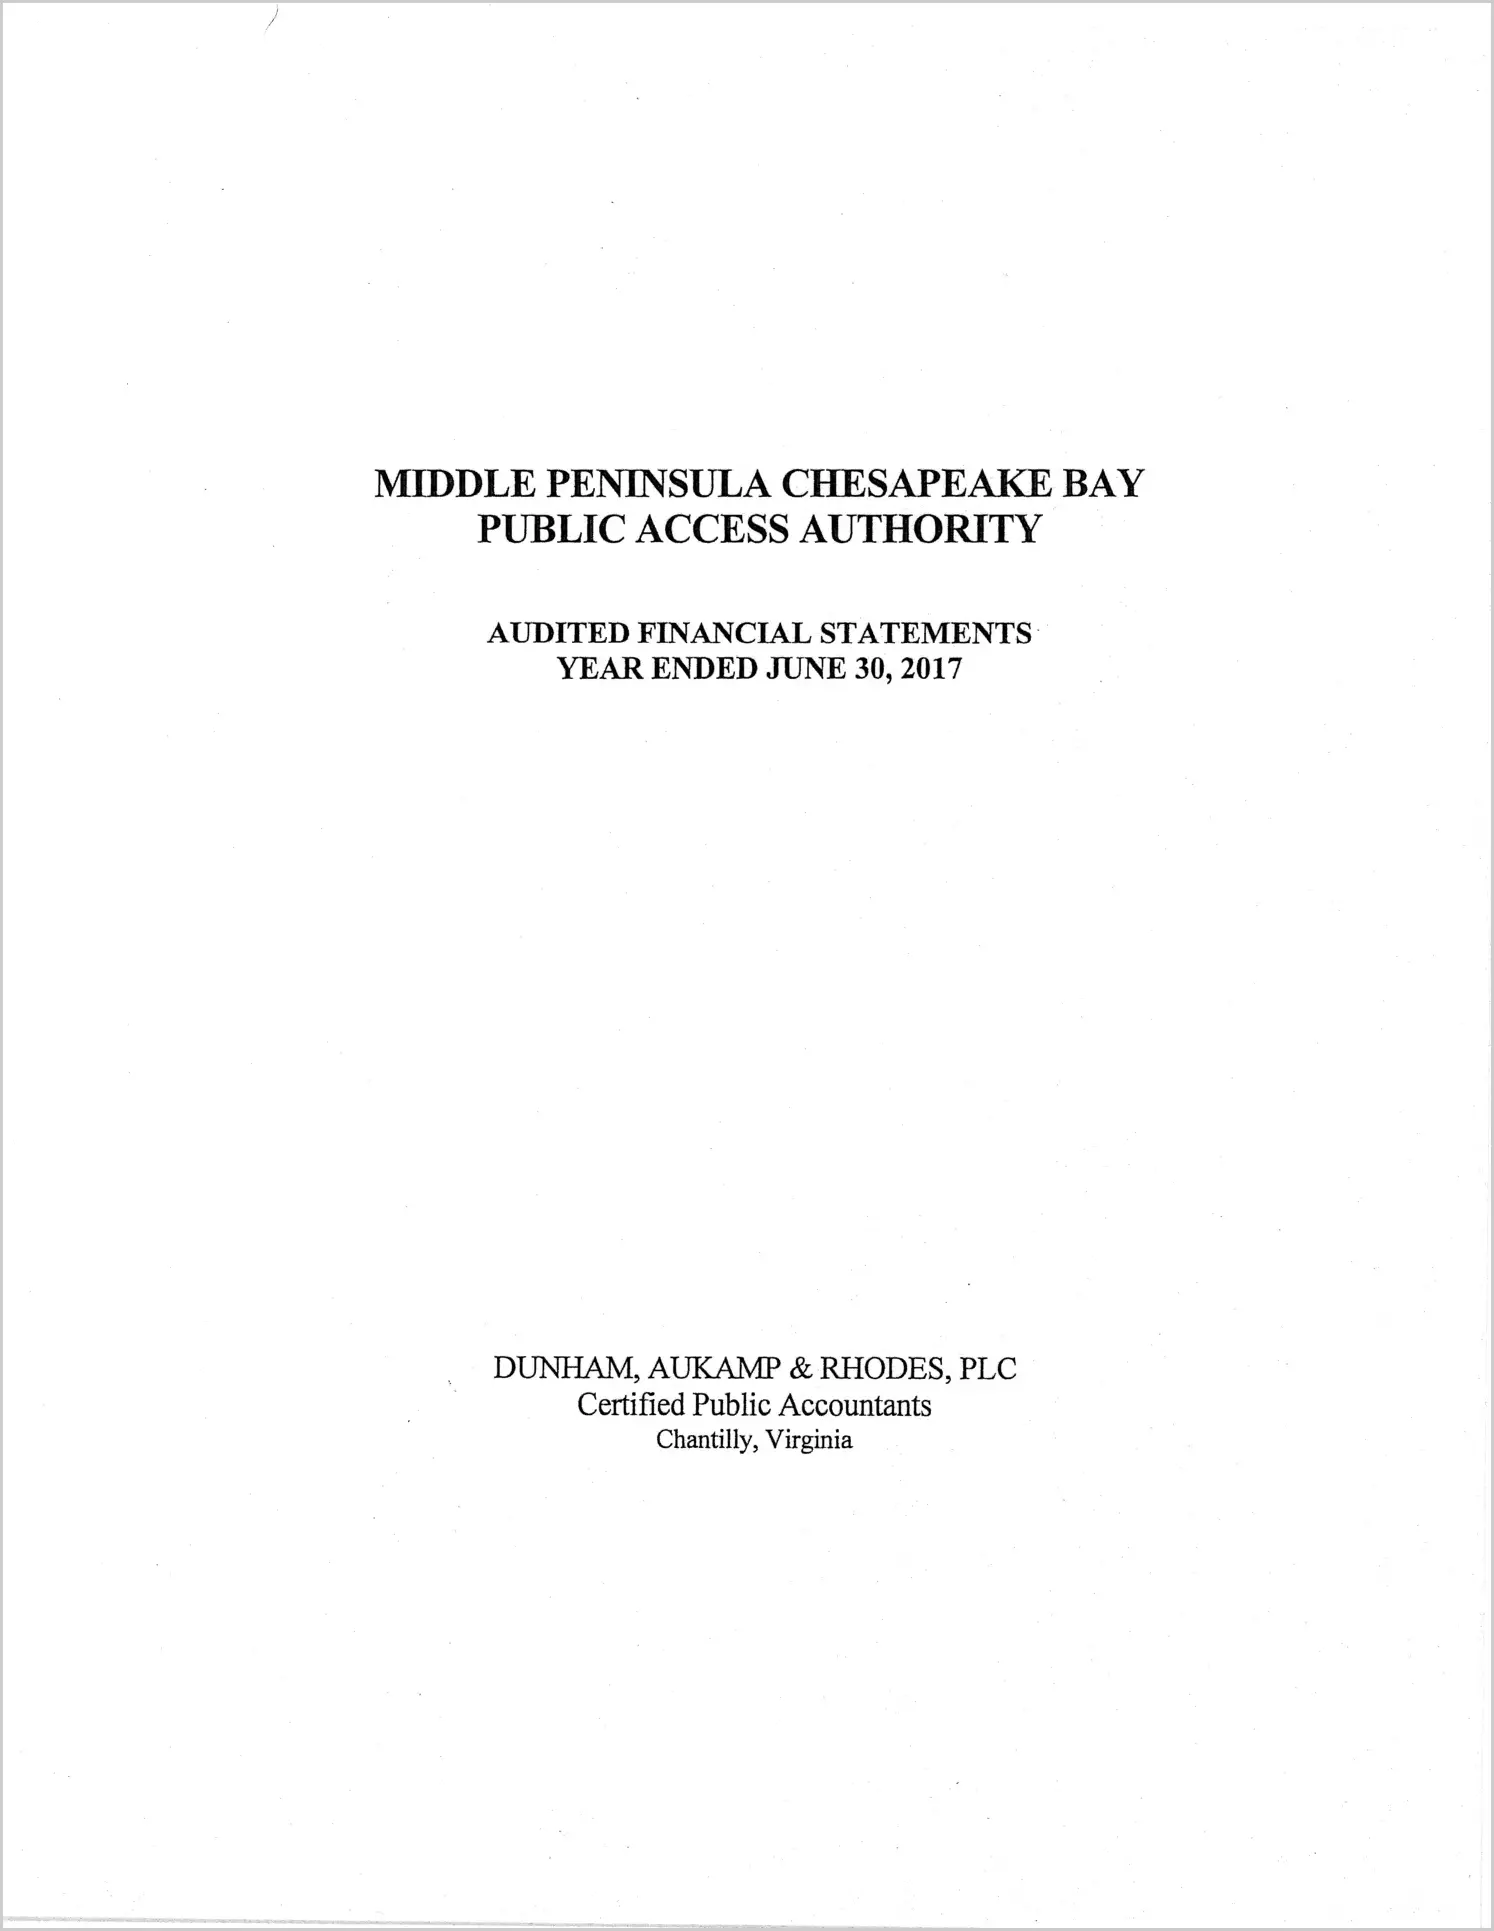 2017 ABC/Other Annual Financial Report  for Middle Peninsula Chesapeake Bay Public Access Authority